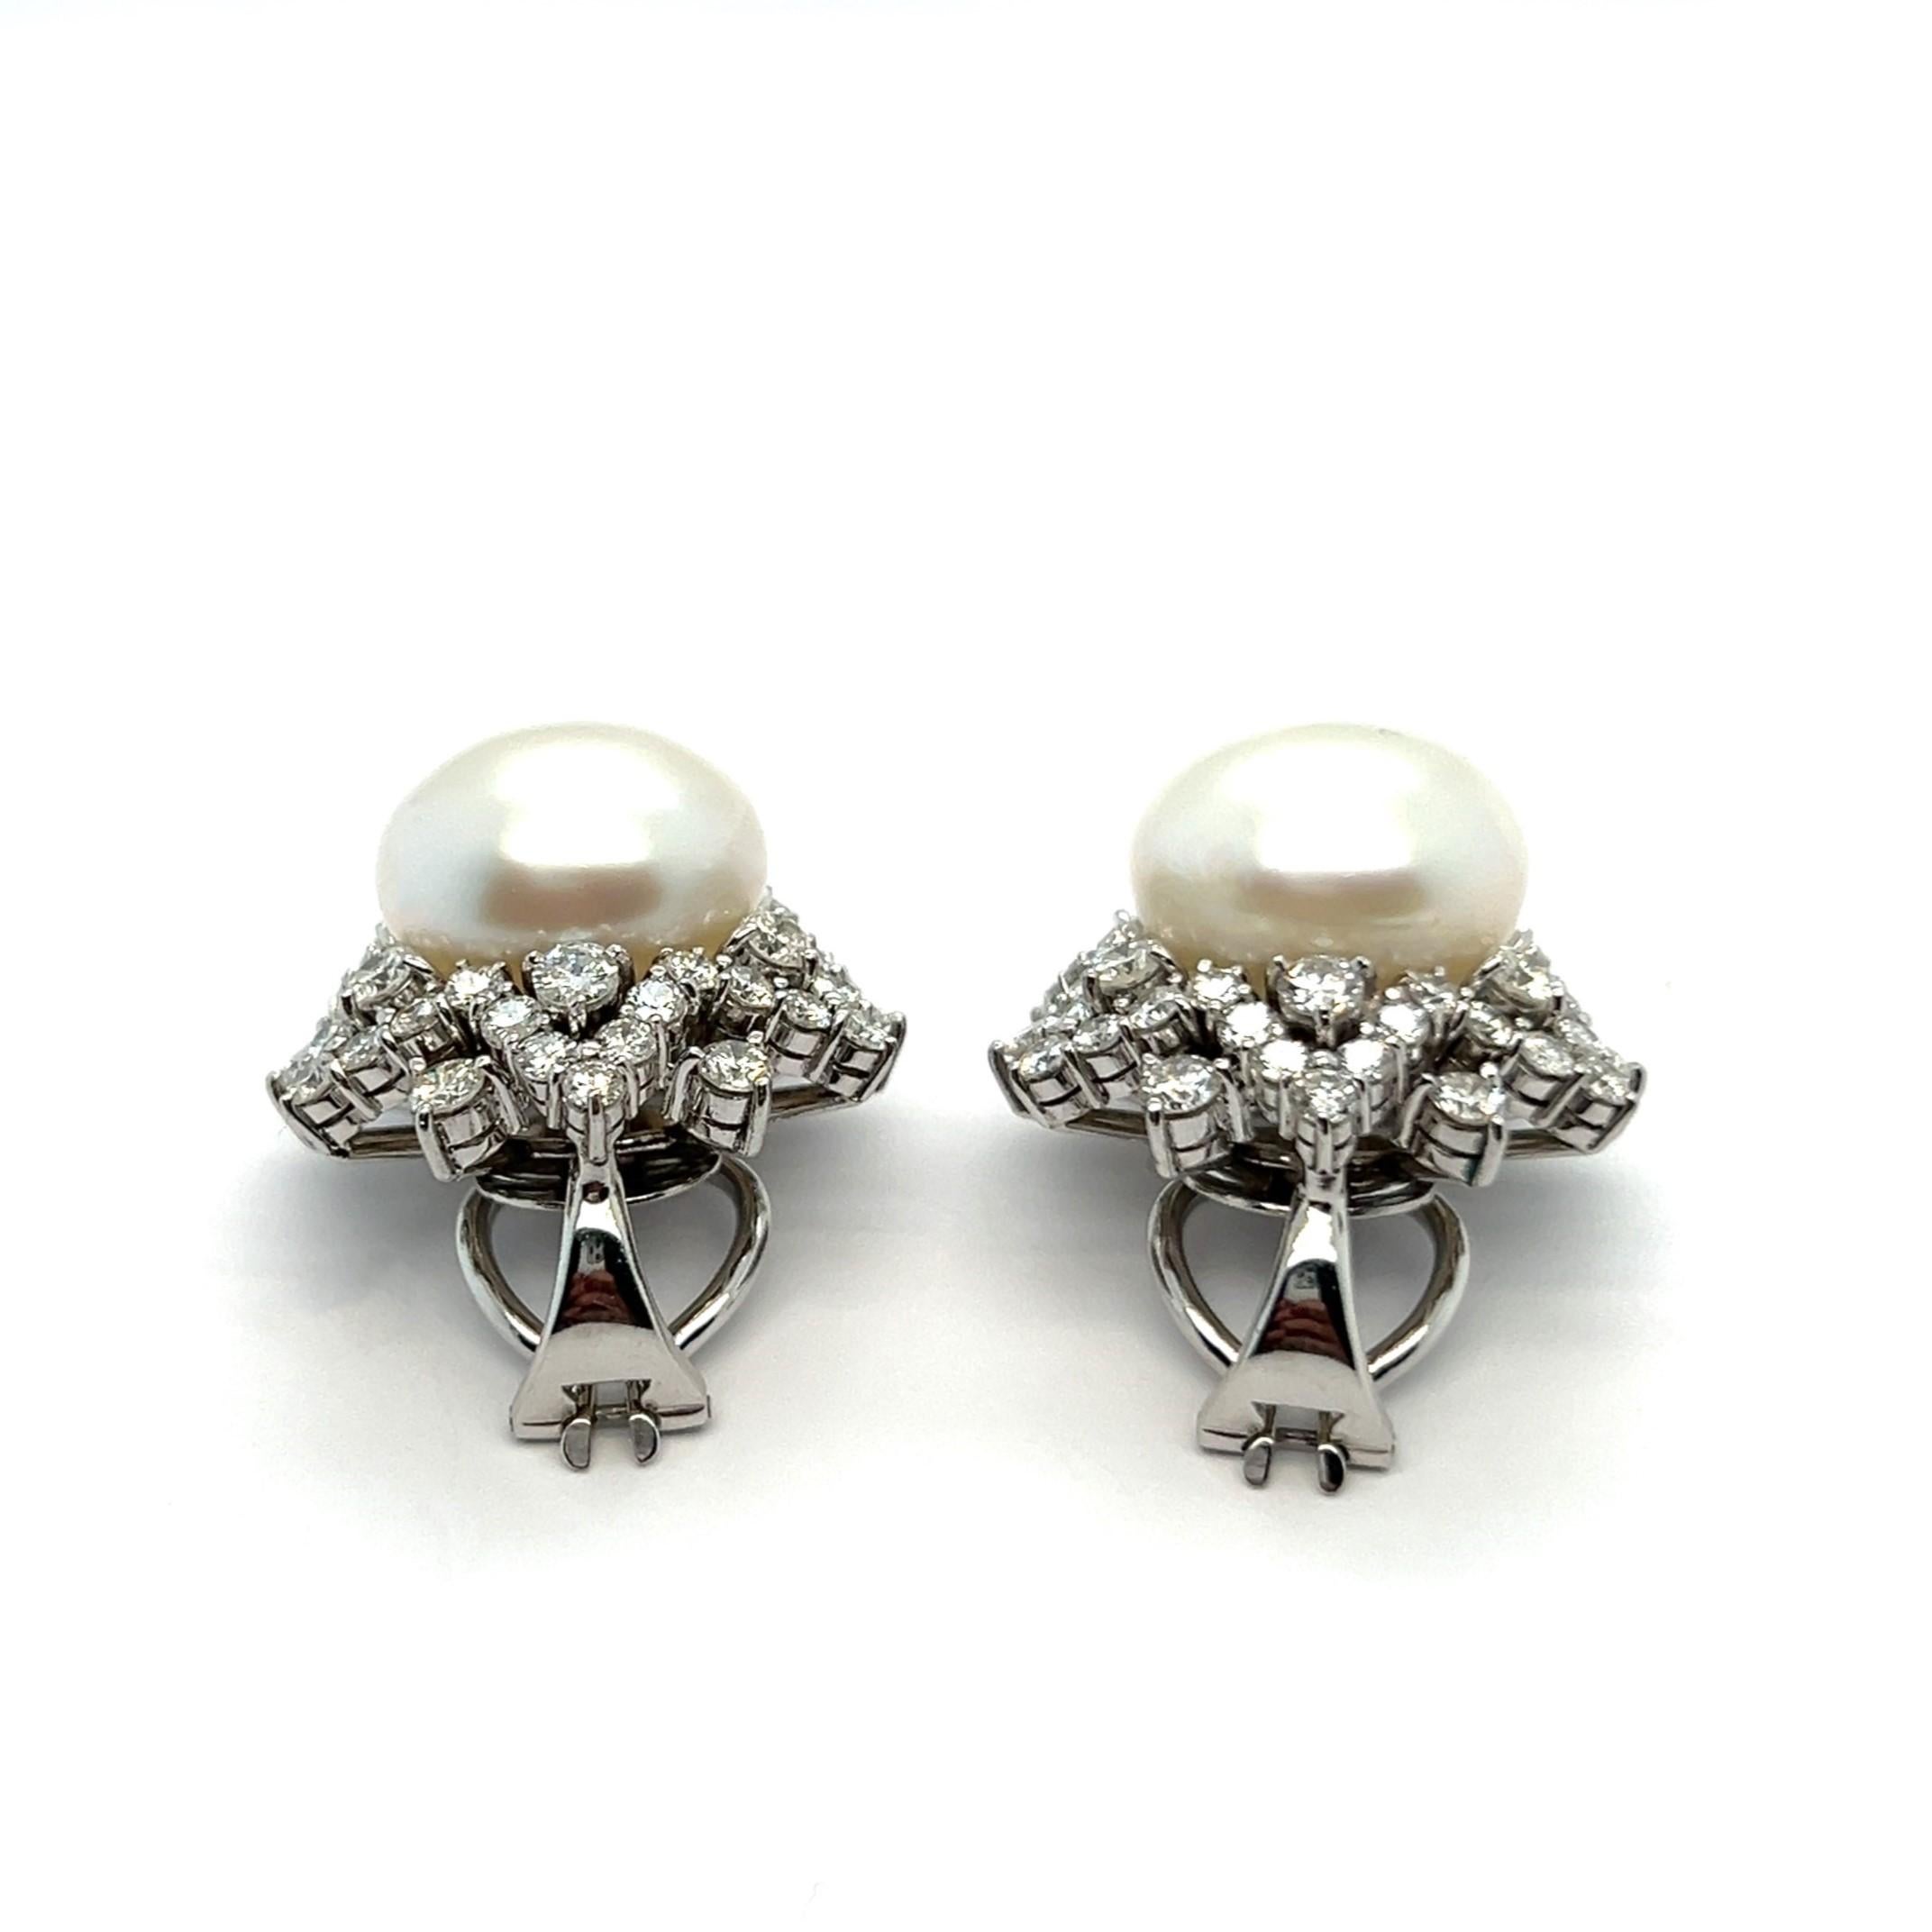 South Sea Pearl Earrings in 18 Karat White Gold by Meister For Sale 3